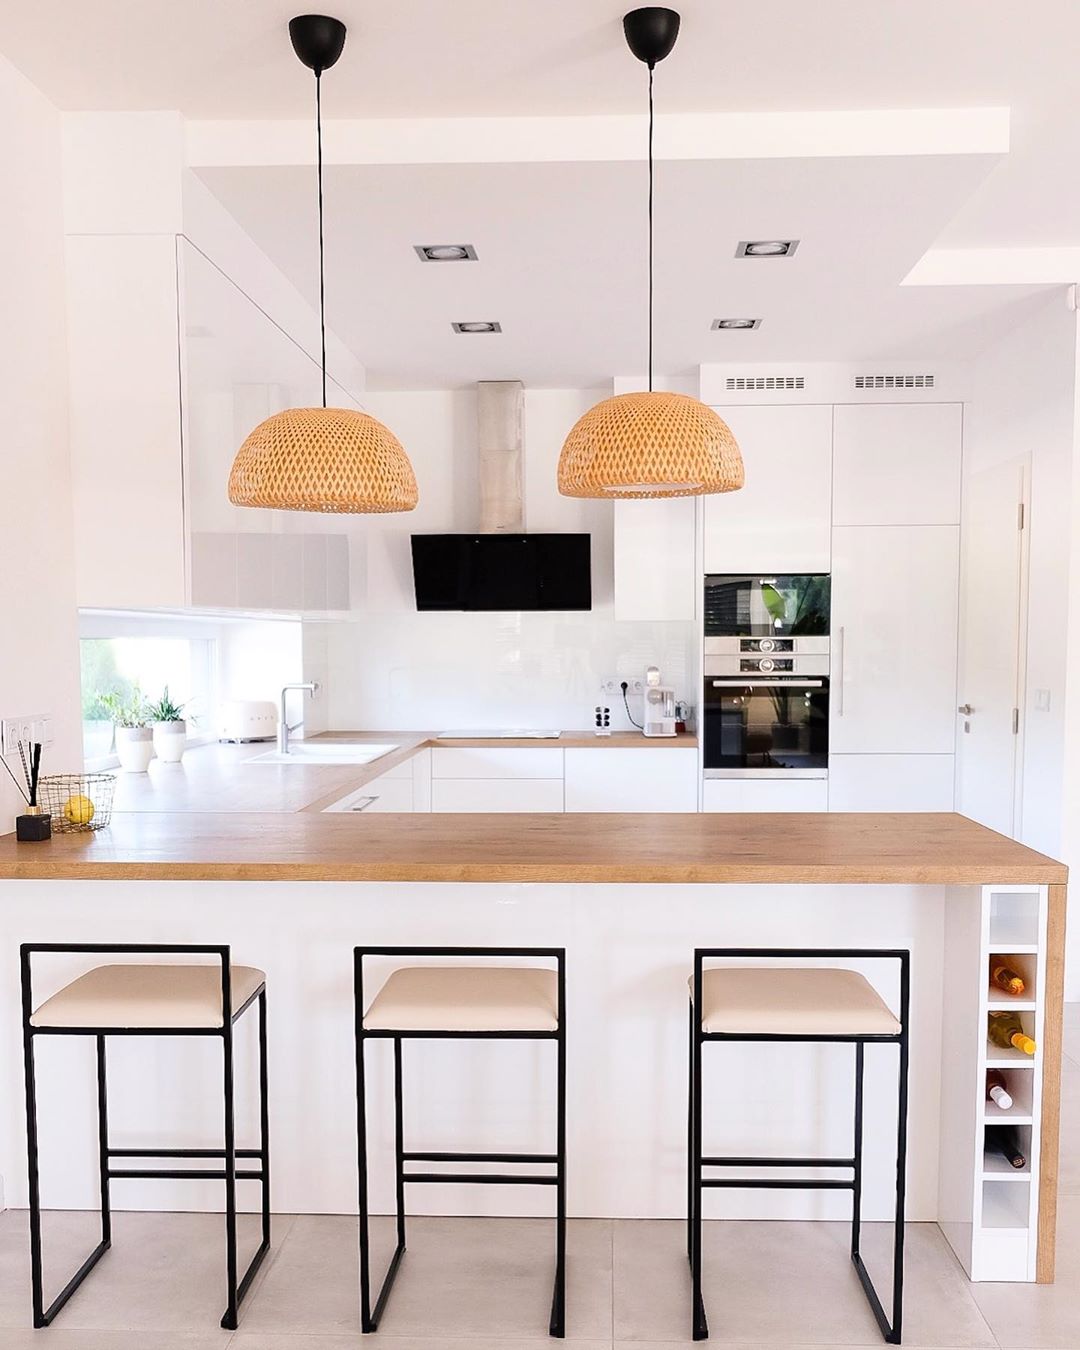 All-white kitchen with wood countertops and yellow light fixtures. Photo by Instagram user @morhome_hun